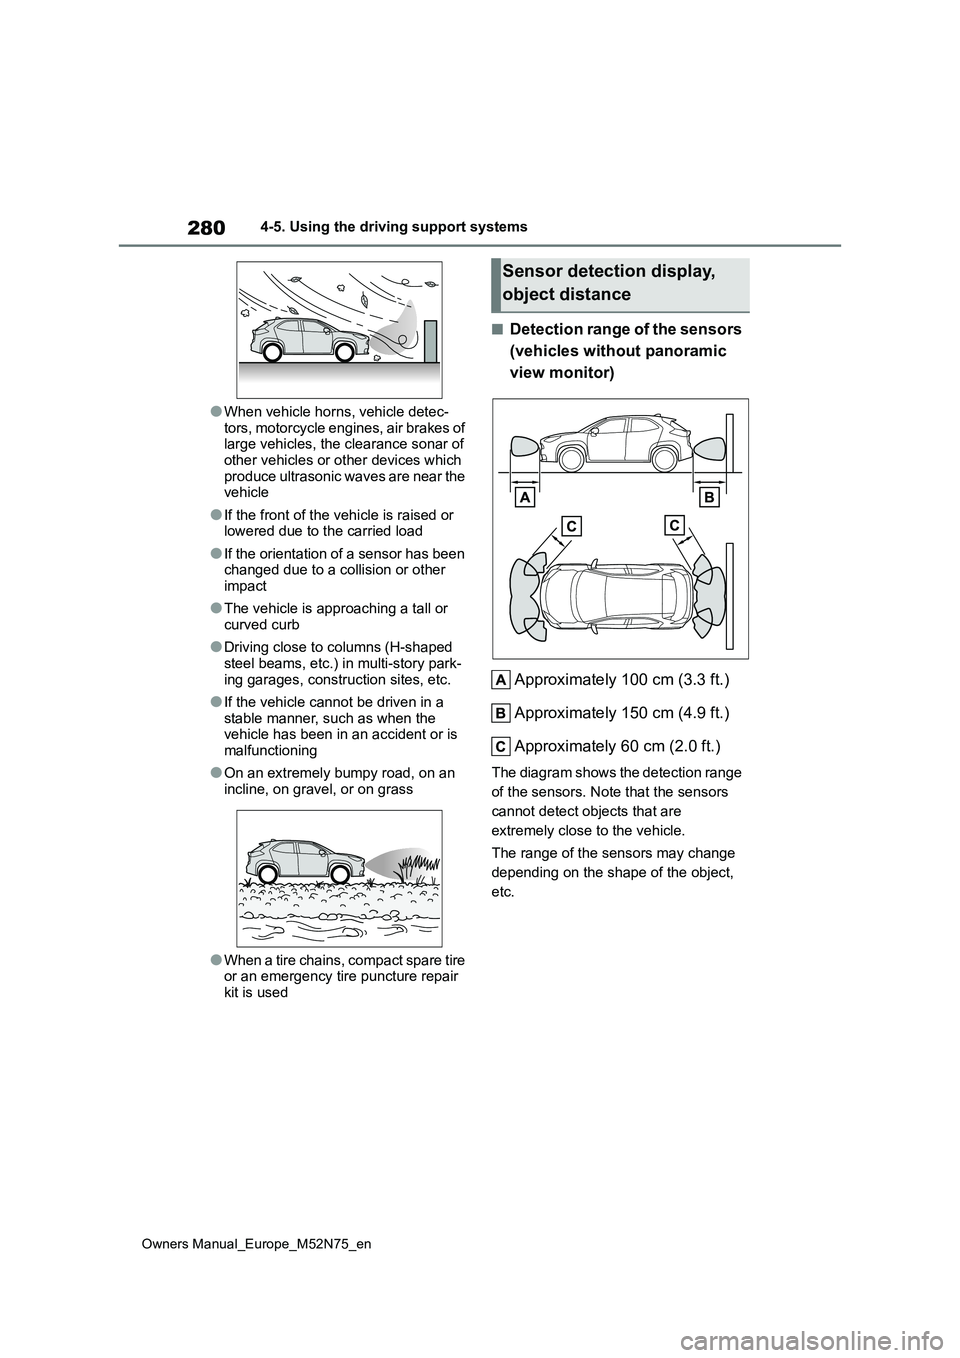 TOYOTA YARIS CROSS 2023  Owners Manual 280
Owners Manual_Europe_M52N75_en
4-5. Using the driving support systems
●When vehicle horns, vehicle detec- 
tors, motorcycle engines, air brakes of  large vehicles, the clearance sonar of other v